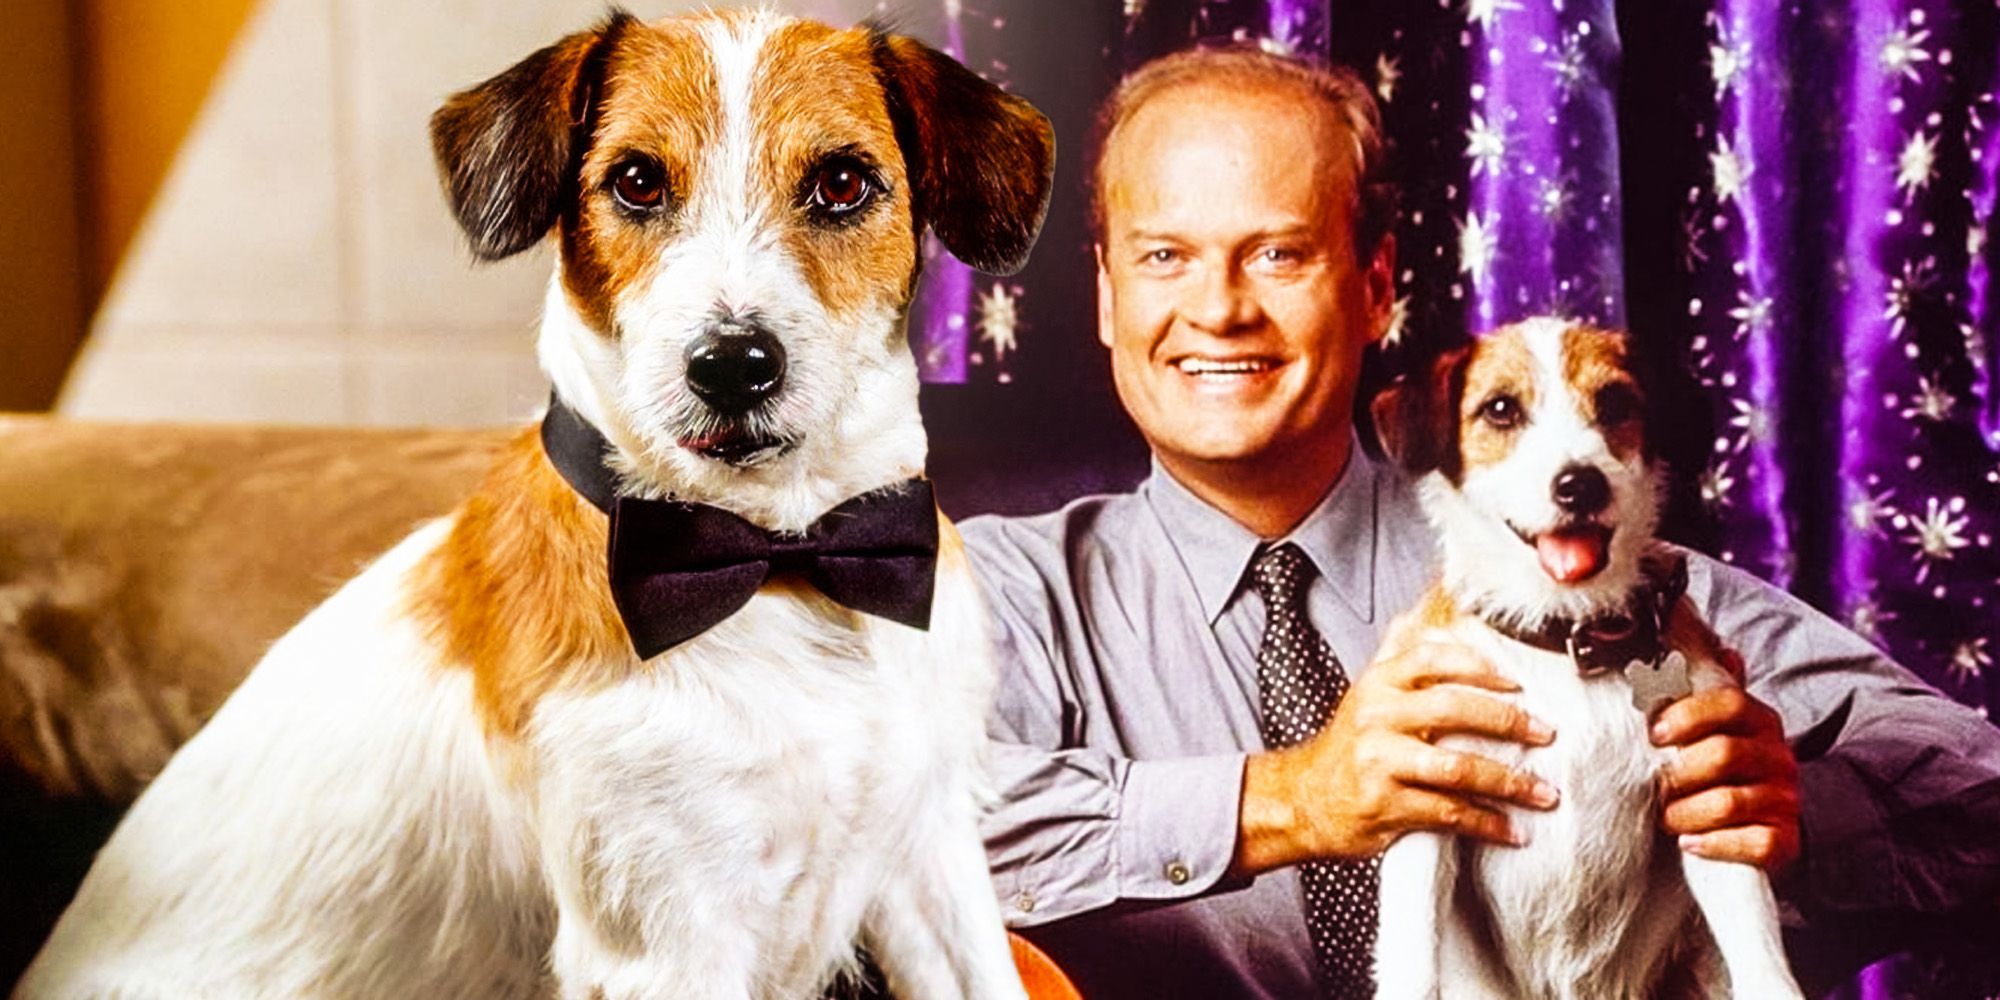 how many dogs played Eddie on frasier